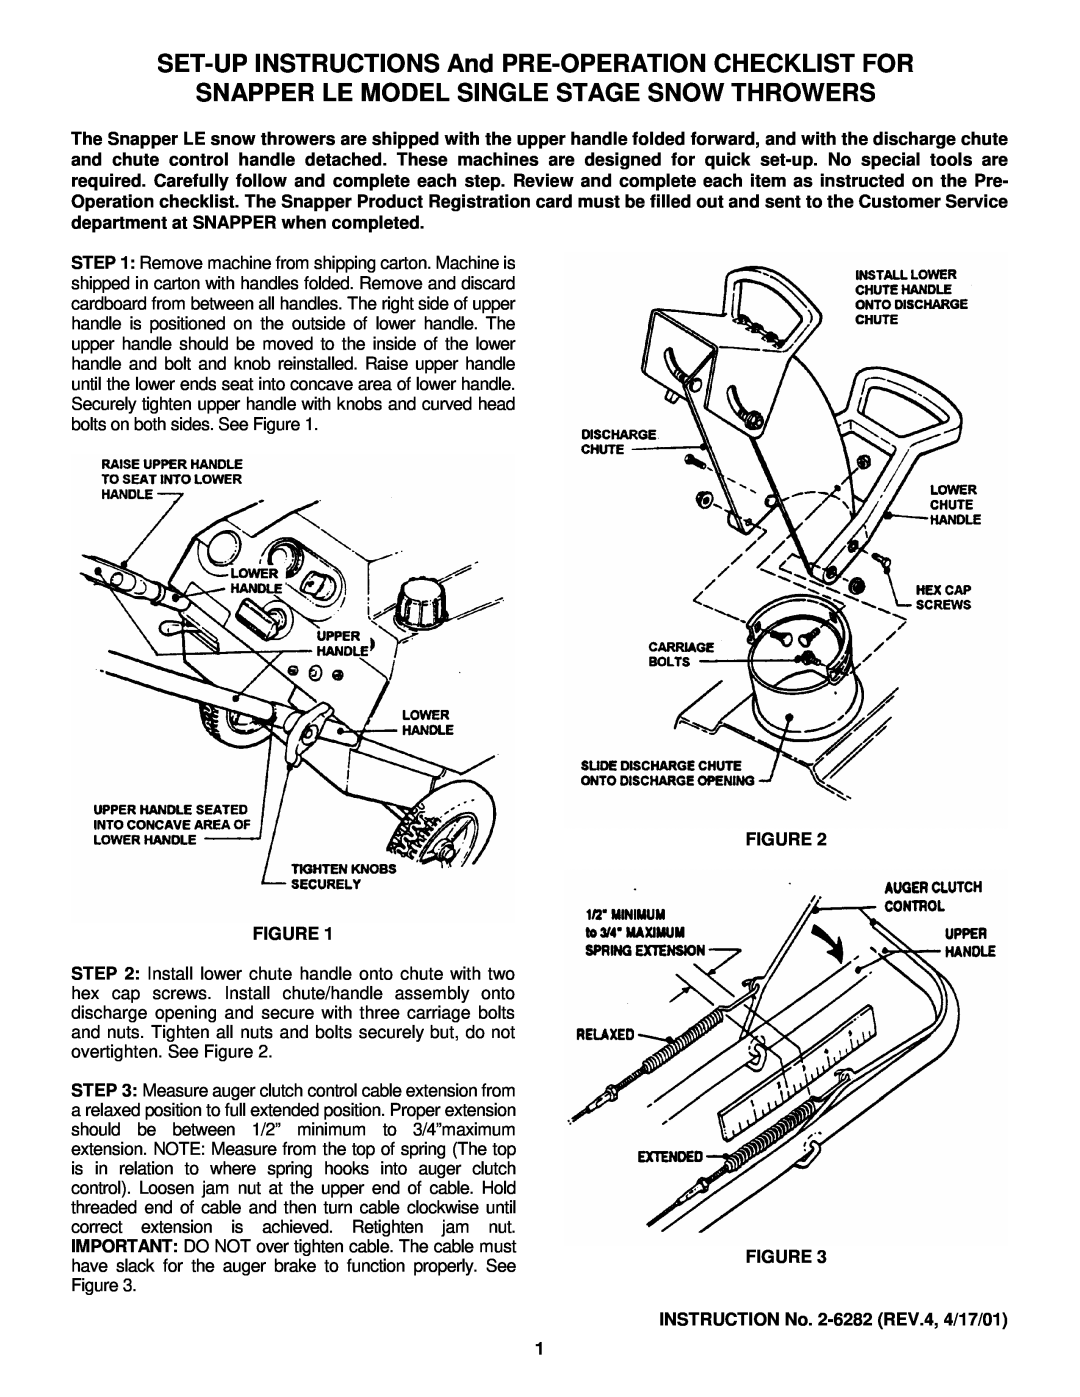 Snapper LE manual SET-UPINSTRUCTIONS And PRE-OPERATIONCHECKLIST FOR, Snapper Le Model Single Stage Snow Throwers 